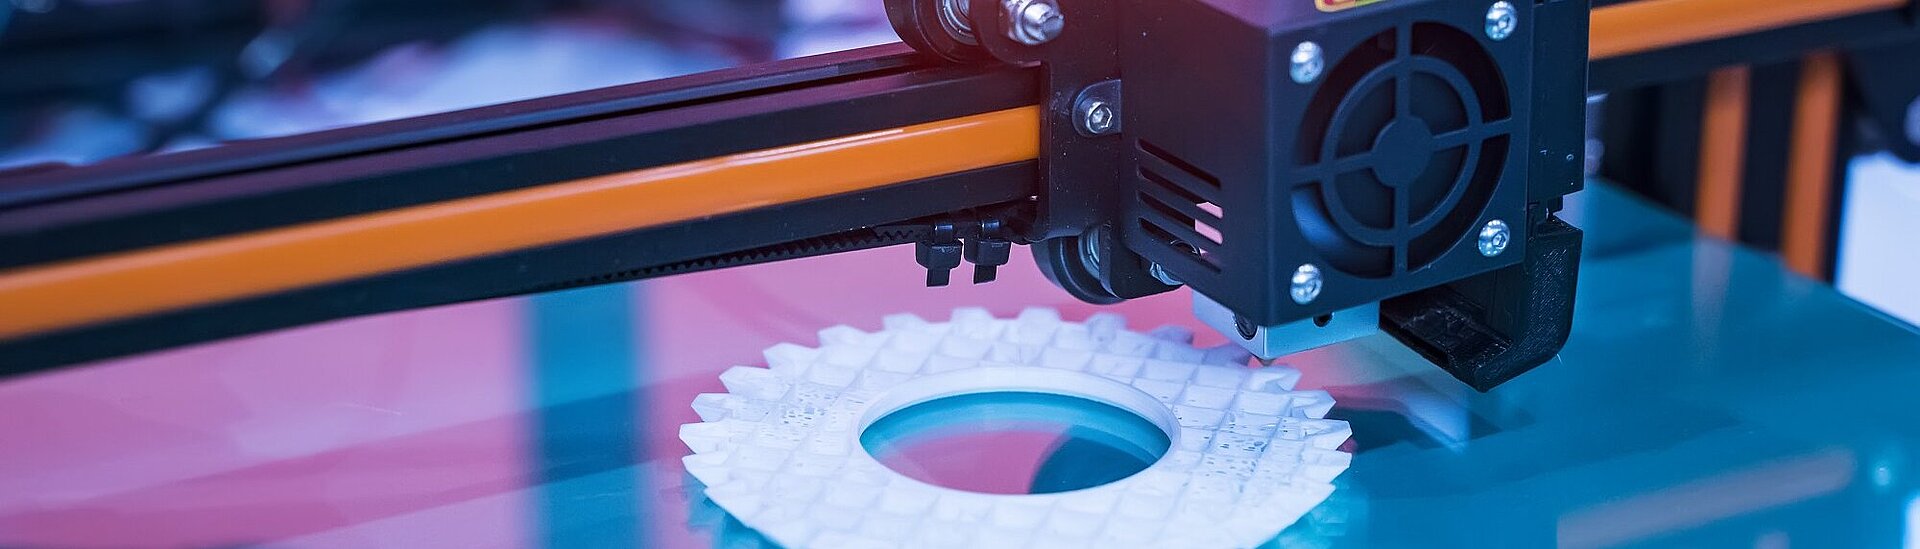 Enabling 3D Printing with Different Materials – Manufacturing Prototypes and Customized Products Fast, Using Piezo Actuators for Continuous Shock-Free Material Transmission During Printing.